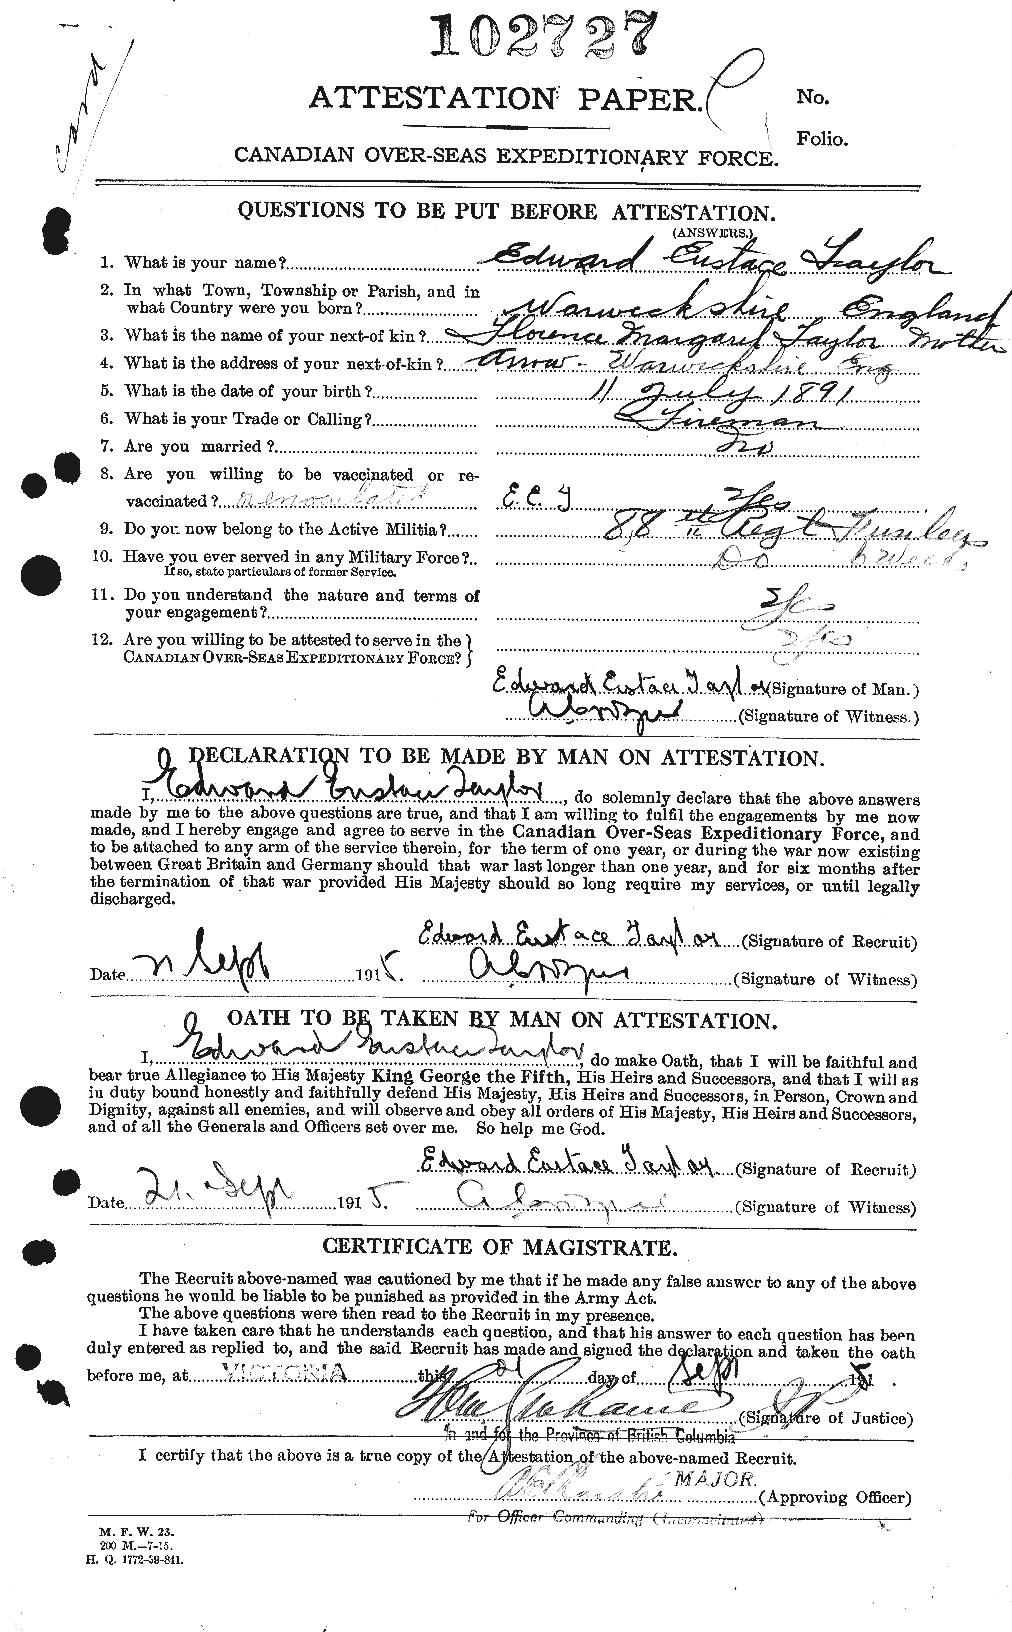 Personnel Records of the First World War - CEF 627309a